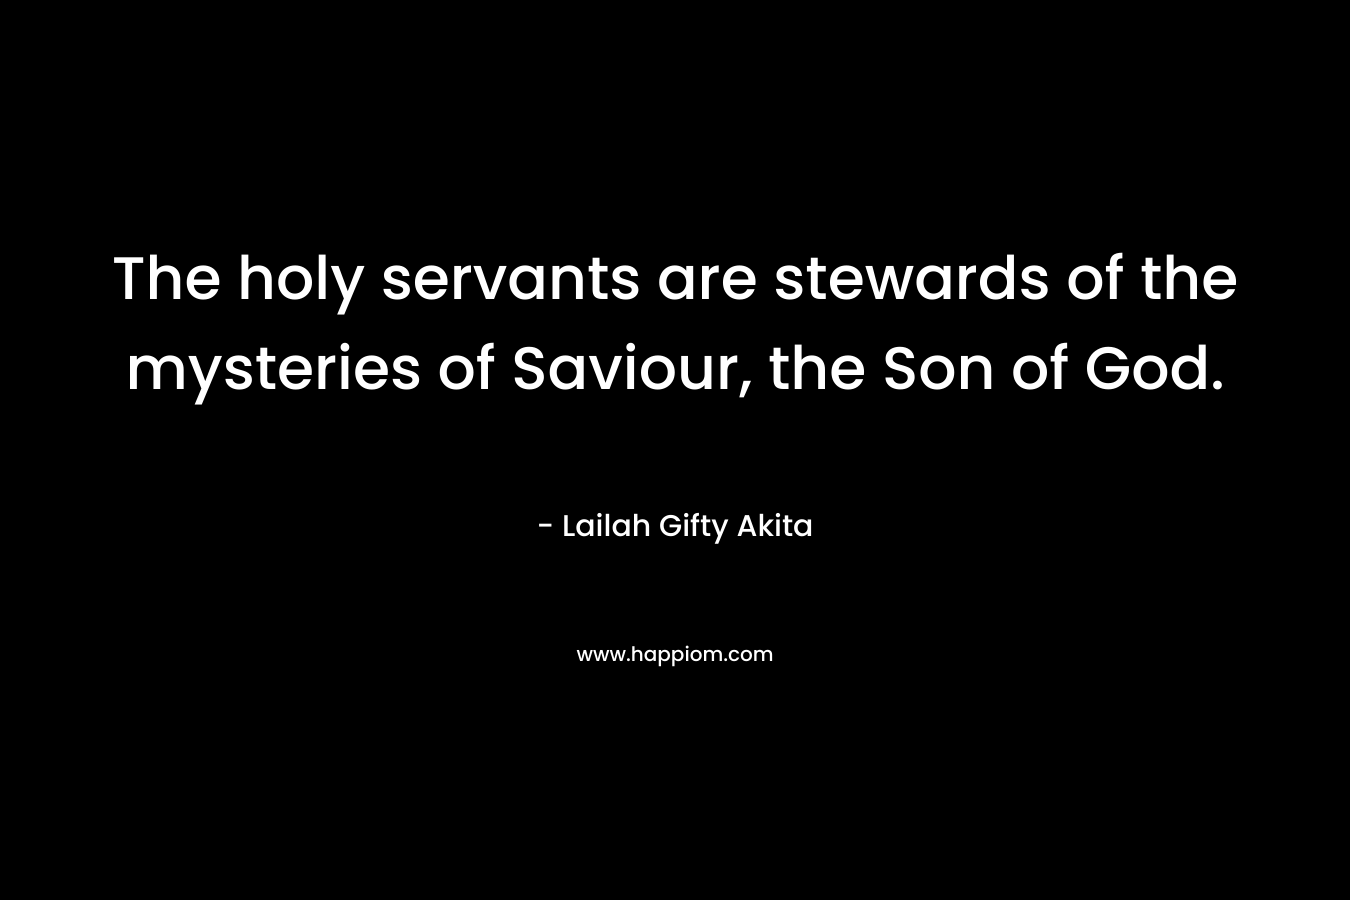 The holy servants are stewards of the mysteries of Saviour, the Son of God.